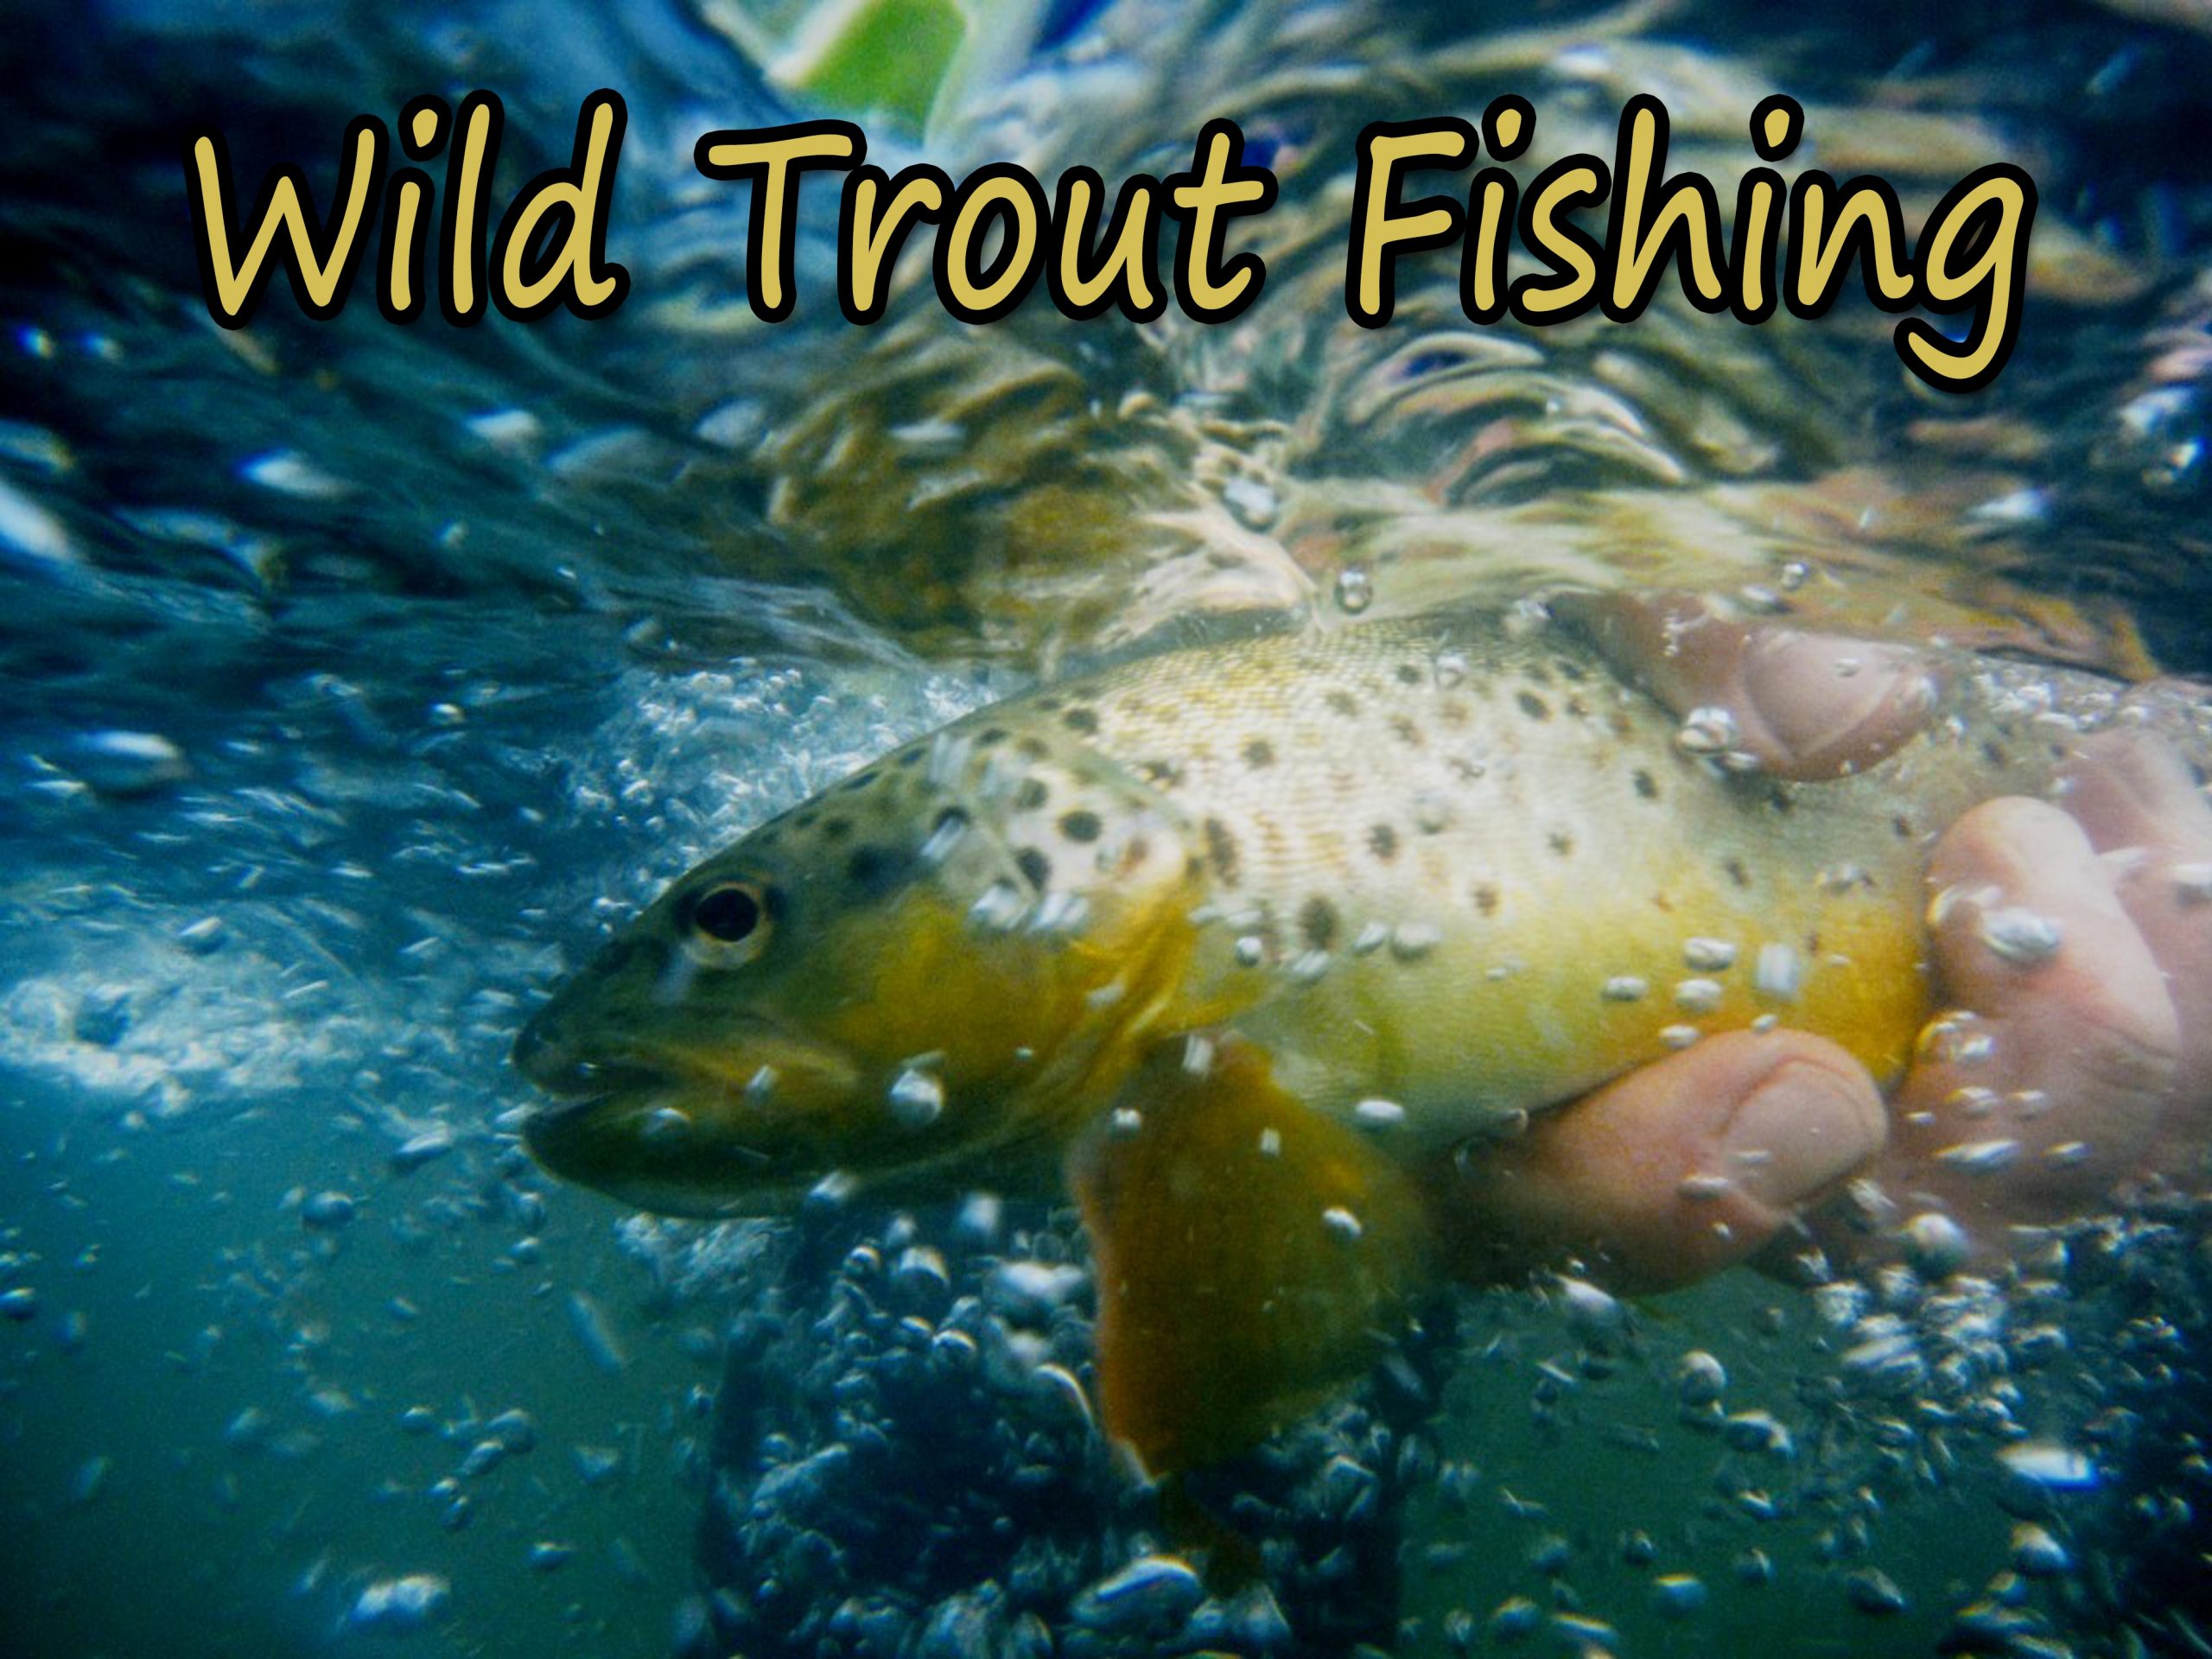 Ask Us About Our Native Brook Trout And Wild Brown Trout Trips. Enjoy A Day Out Or An Overnight Packaged Trip